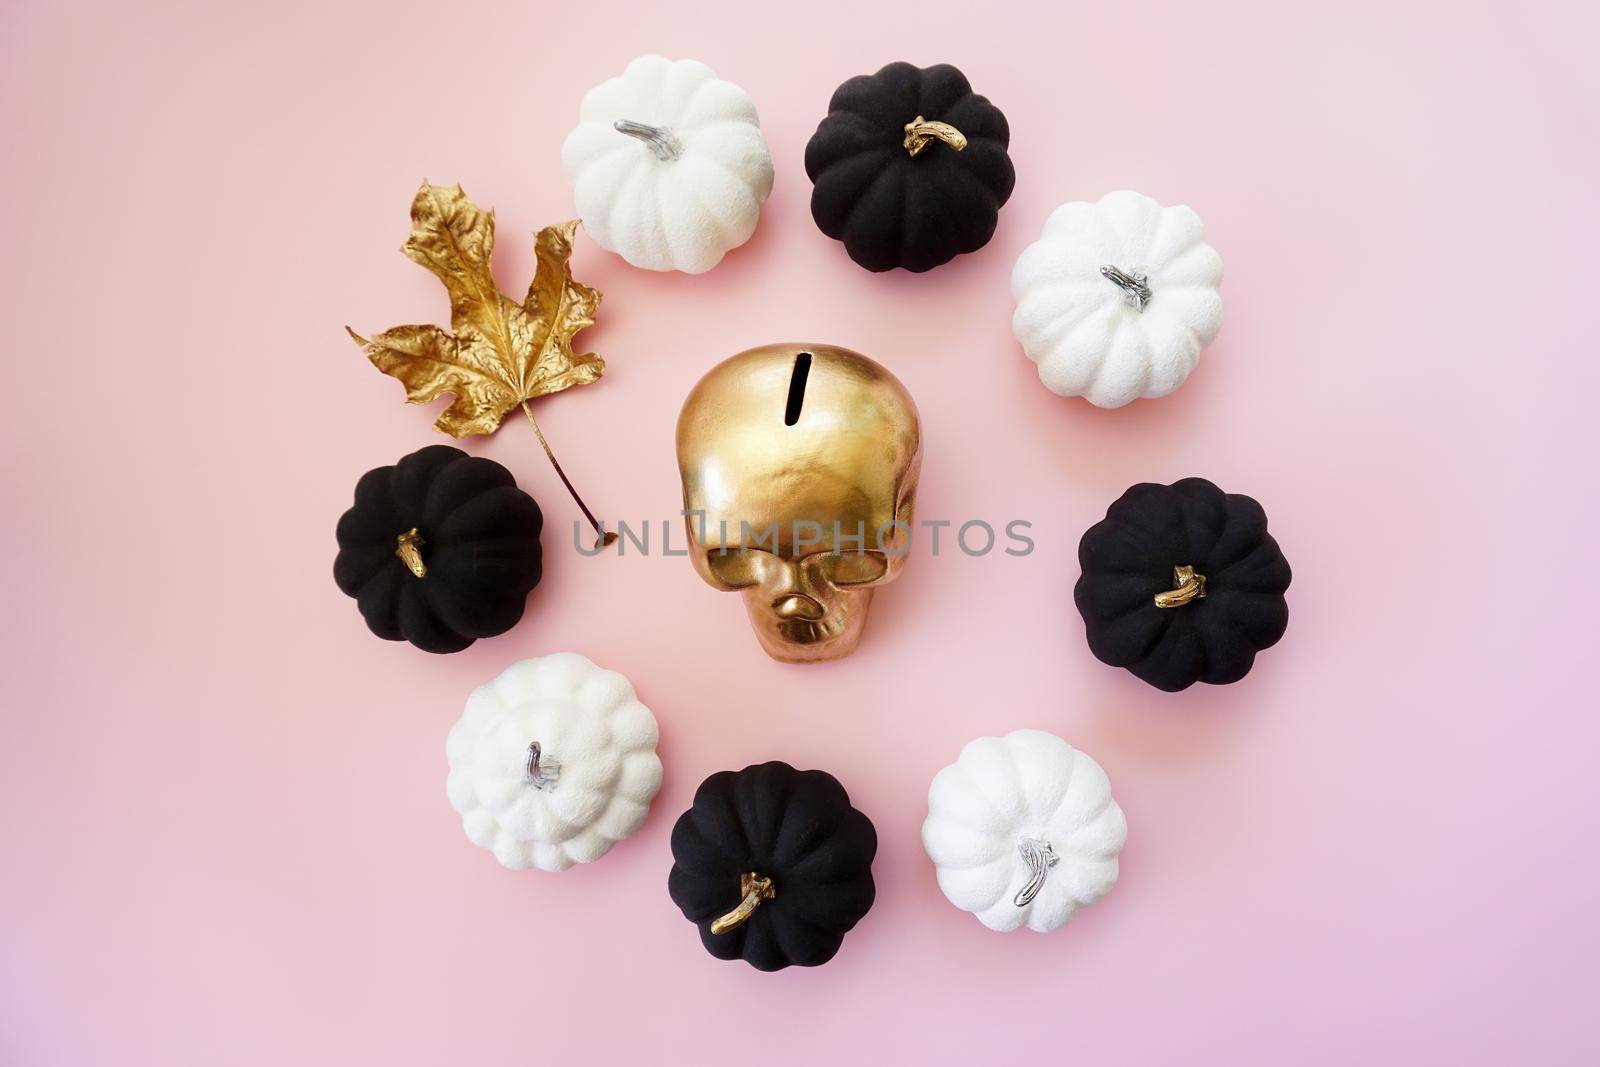 Multicolored pumpkins and a golden skull lie on a pink background by Spirina